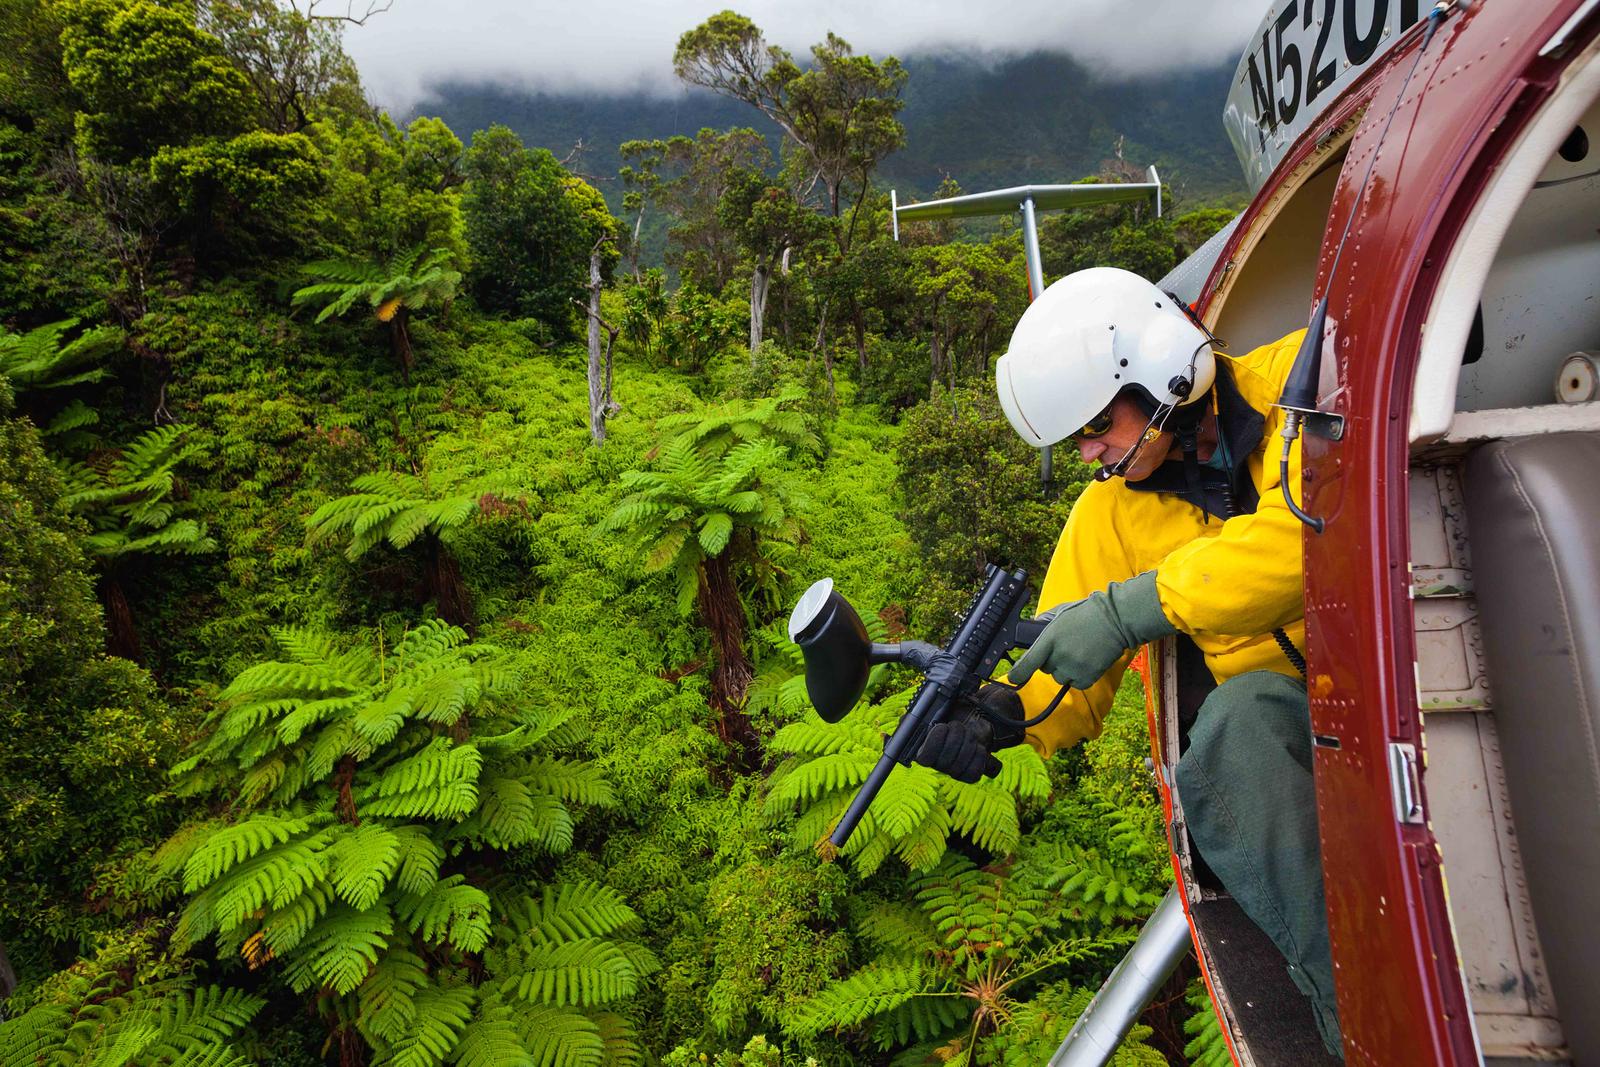 Zapping Invasive Plants from a Helicopter